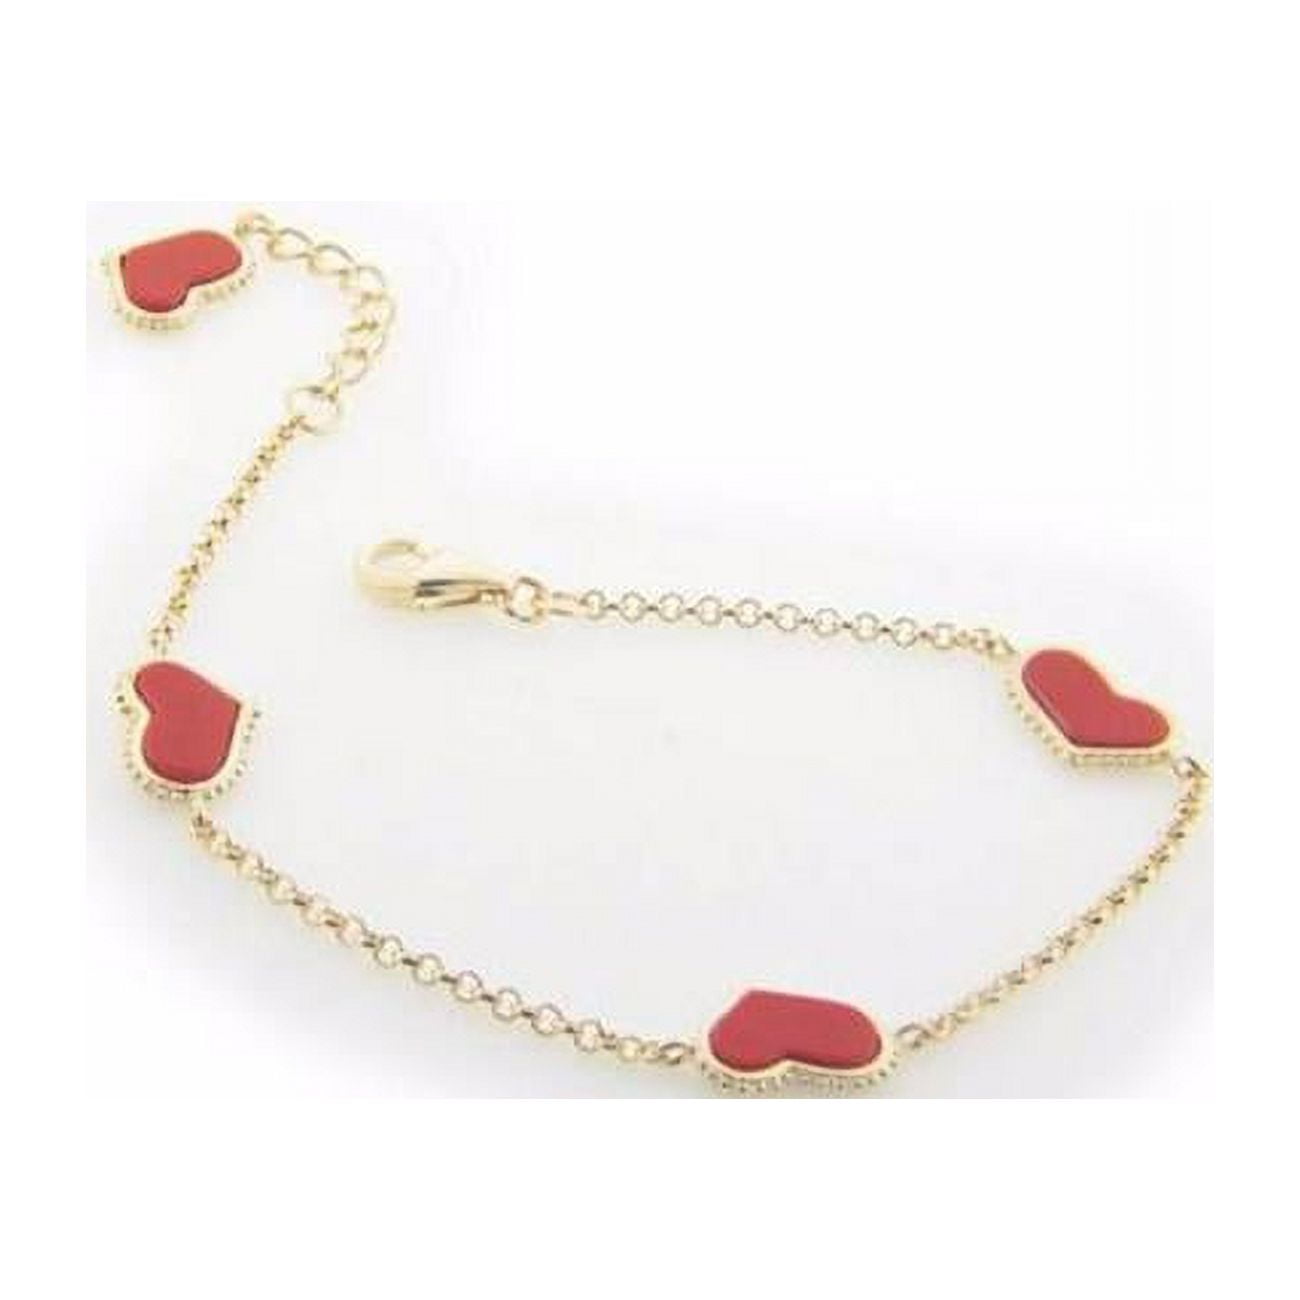 762113C 7 & 1 in. Four Coral Hearts Charms Bracelet in Vermeil Sterling -  Fronay